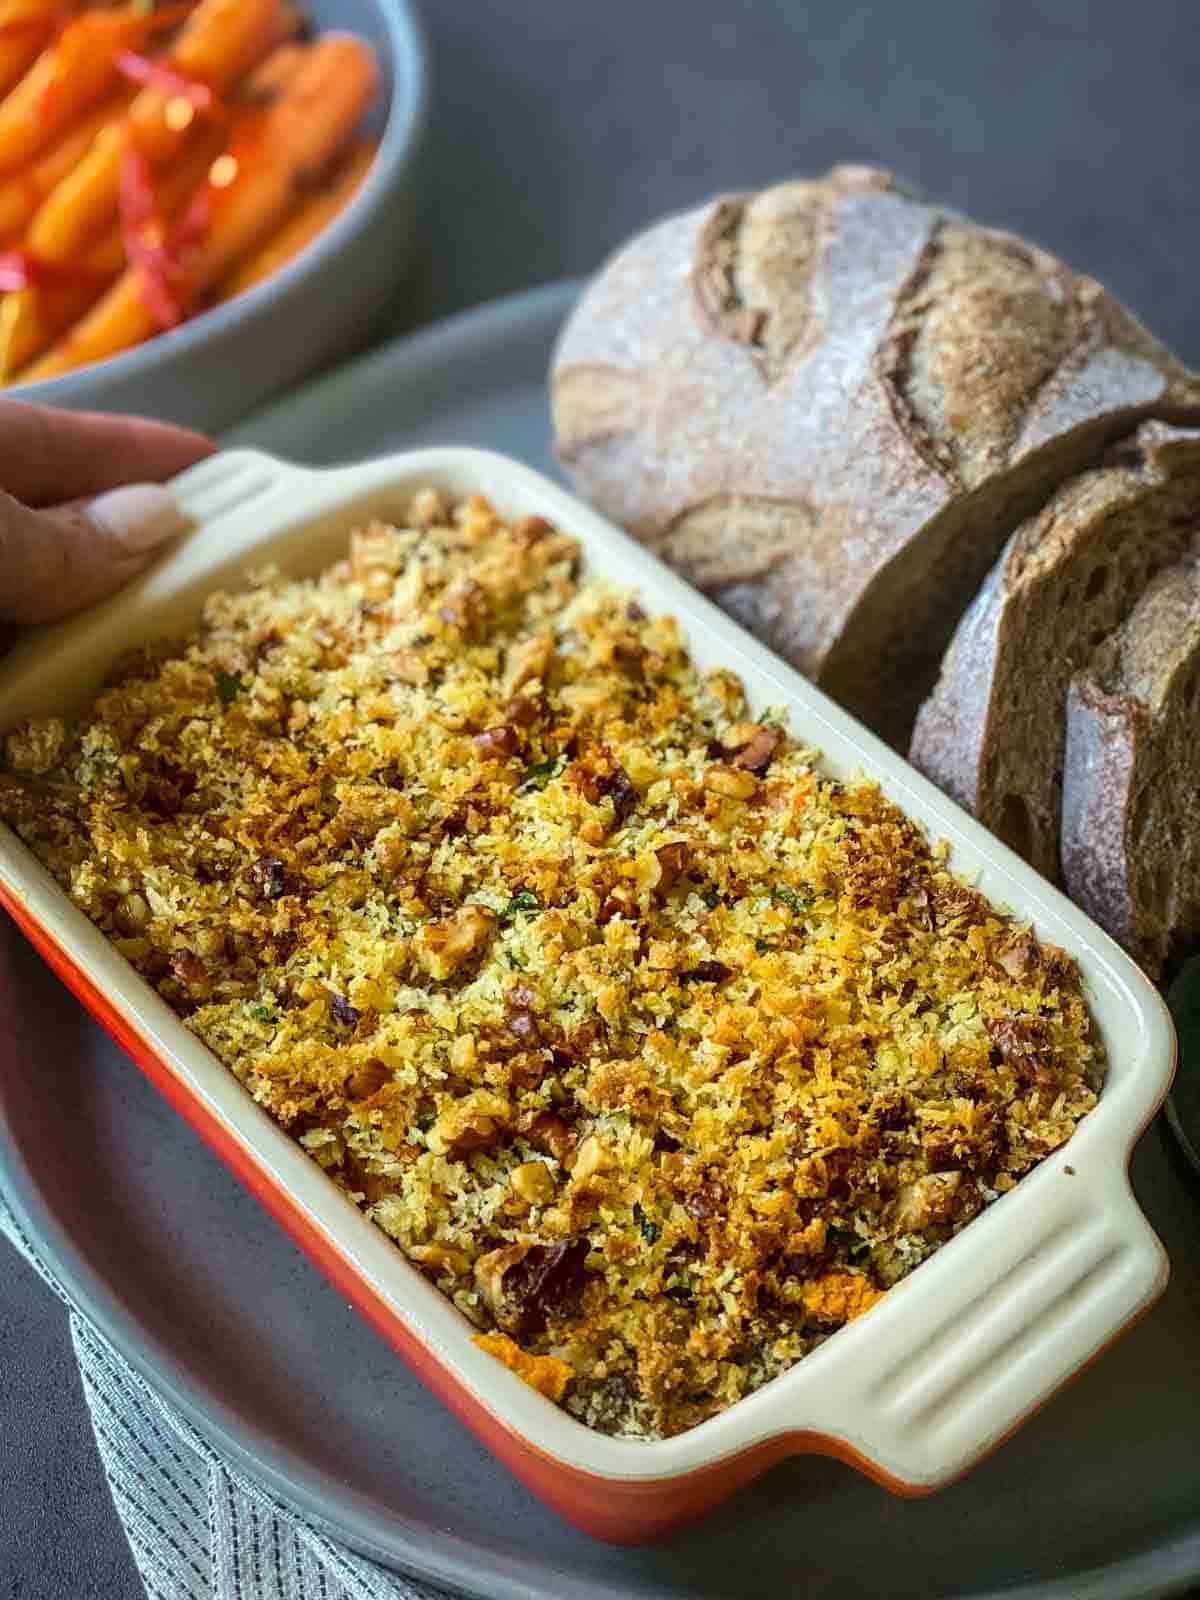 Savoury Sweet Potato Casserole in a ceramic baking dish, with bread on the side